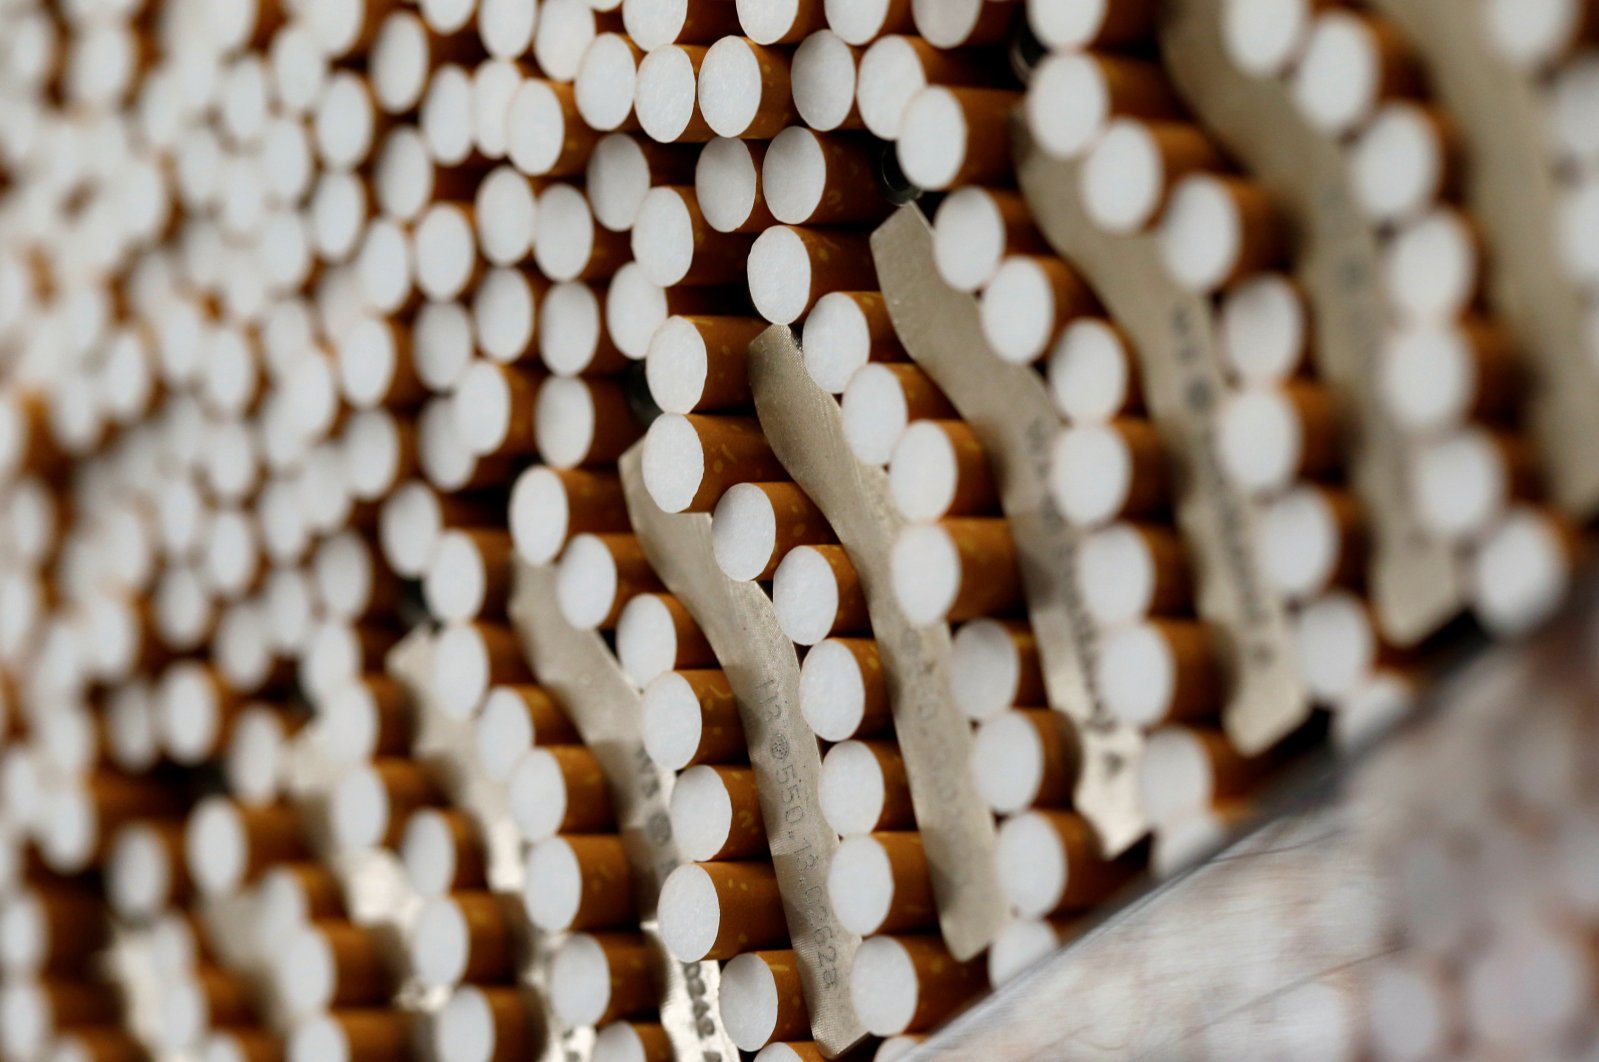 Cigarettes are seen during the manufacturing process in the British American Tobacco Cigarette Factory (BAT) in Bayreuth, southern Germany, April 30, 2014. (Reuters Photo)